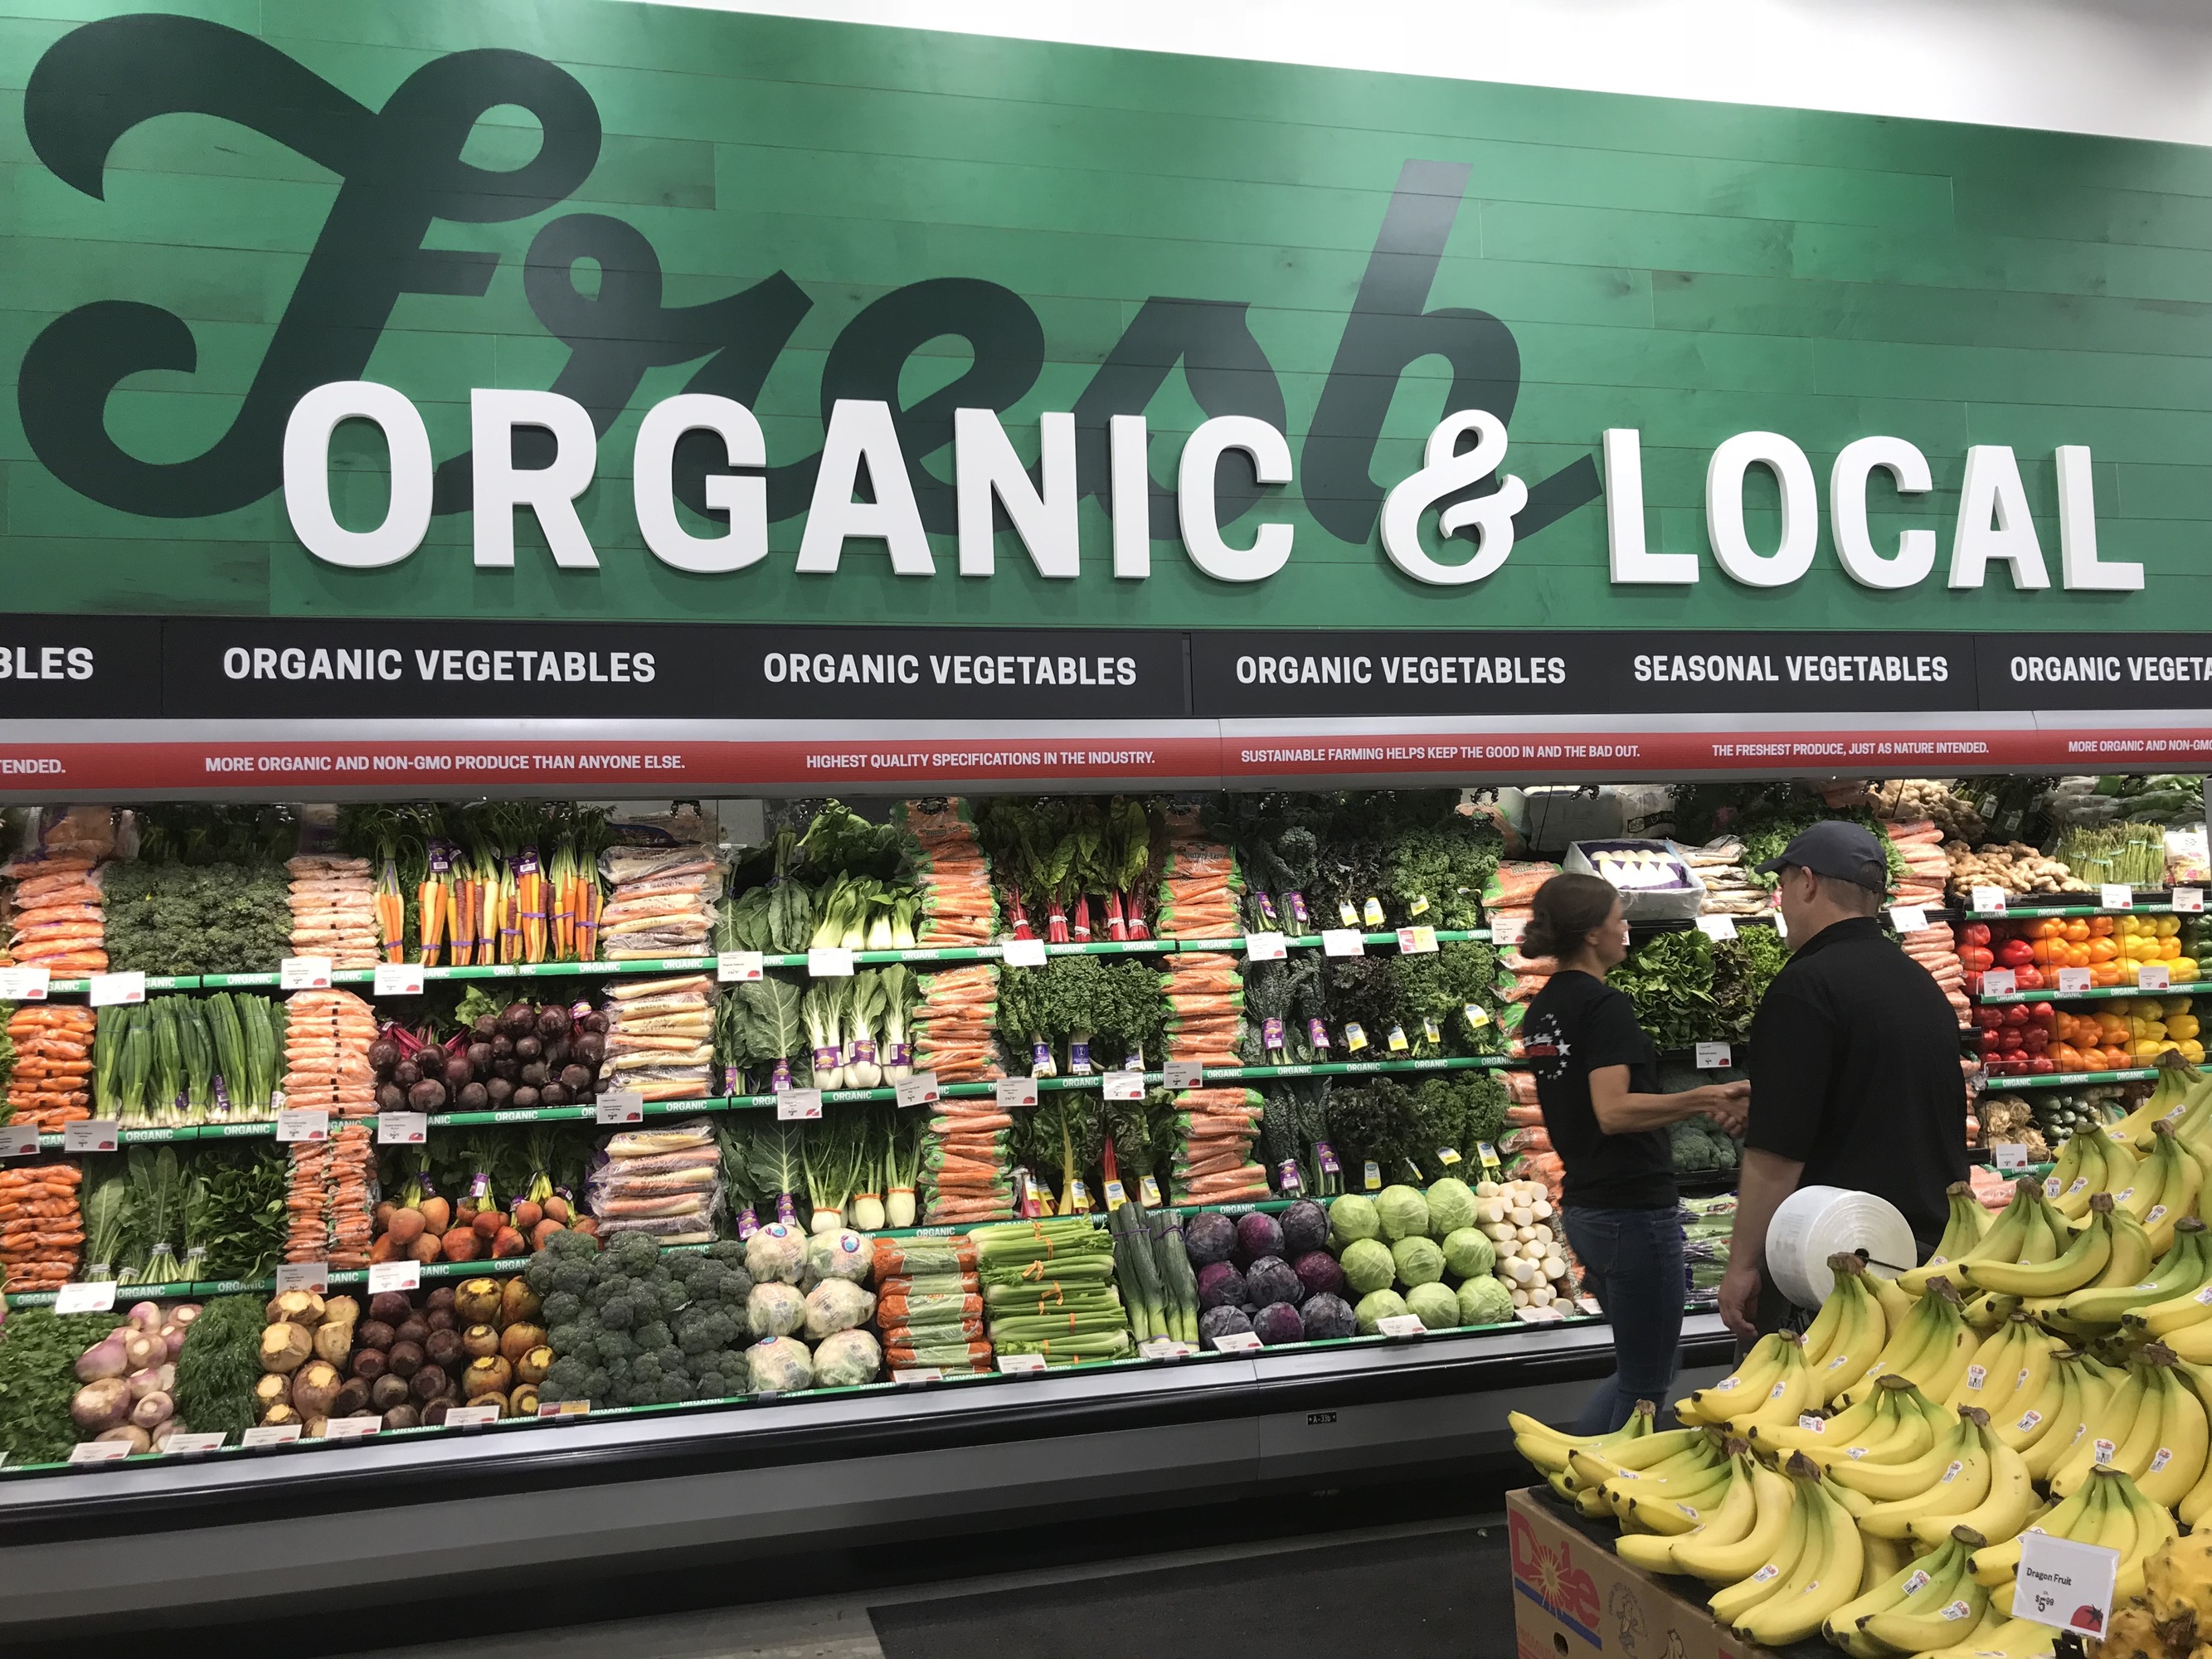 Earth Fare Opens Natural and Organic Grocery Store in Williamsburg